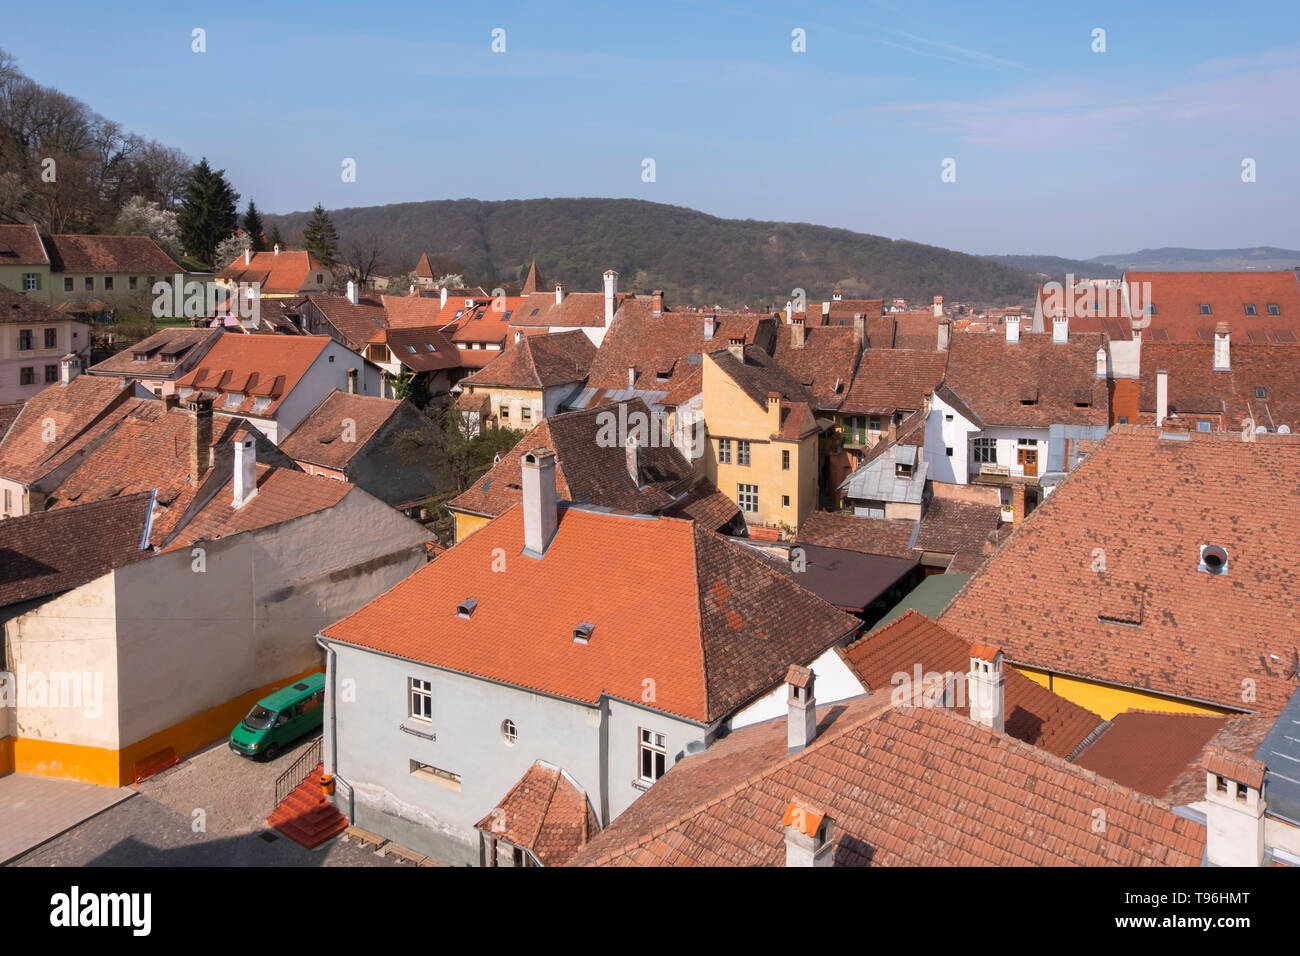 View from the Clock Tower in Sighisoara of colorful rooftops in the citadel on a day in spring. Stock Photo